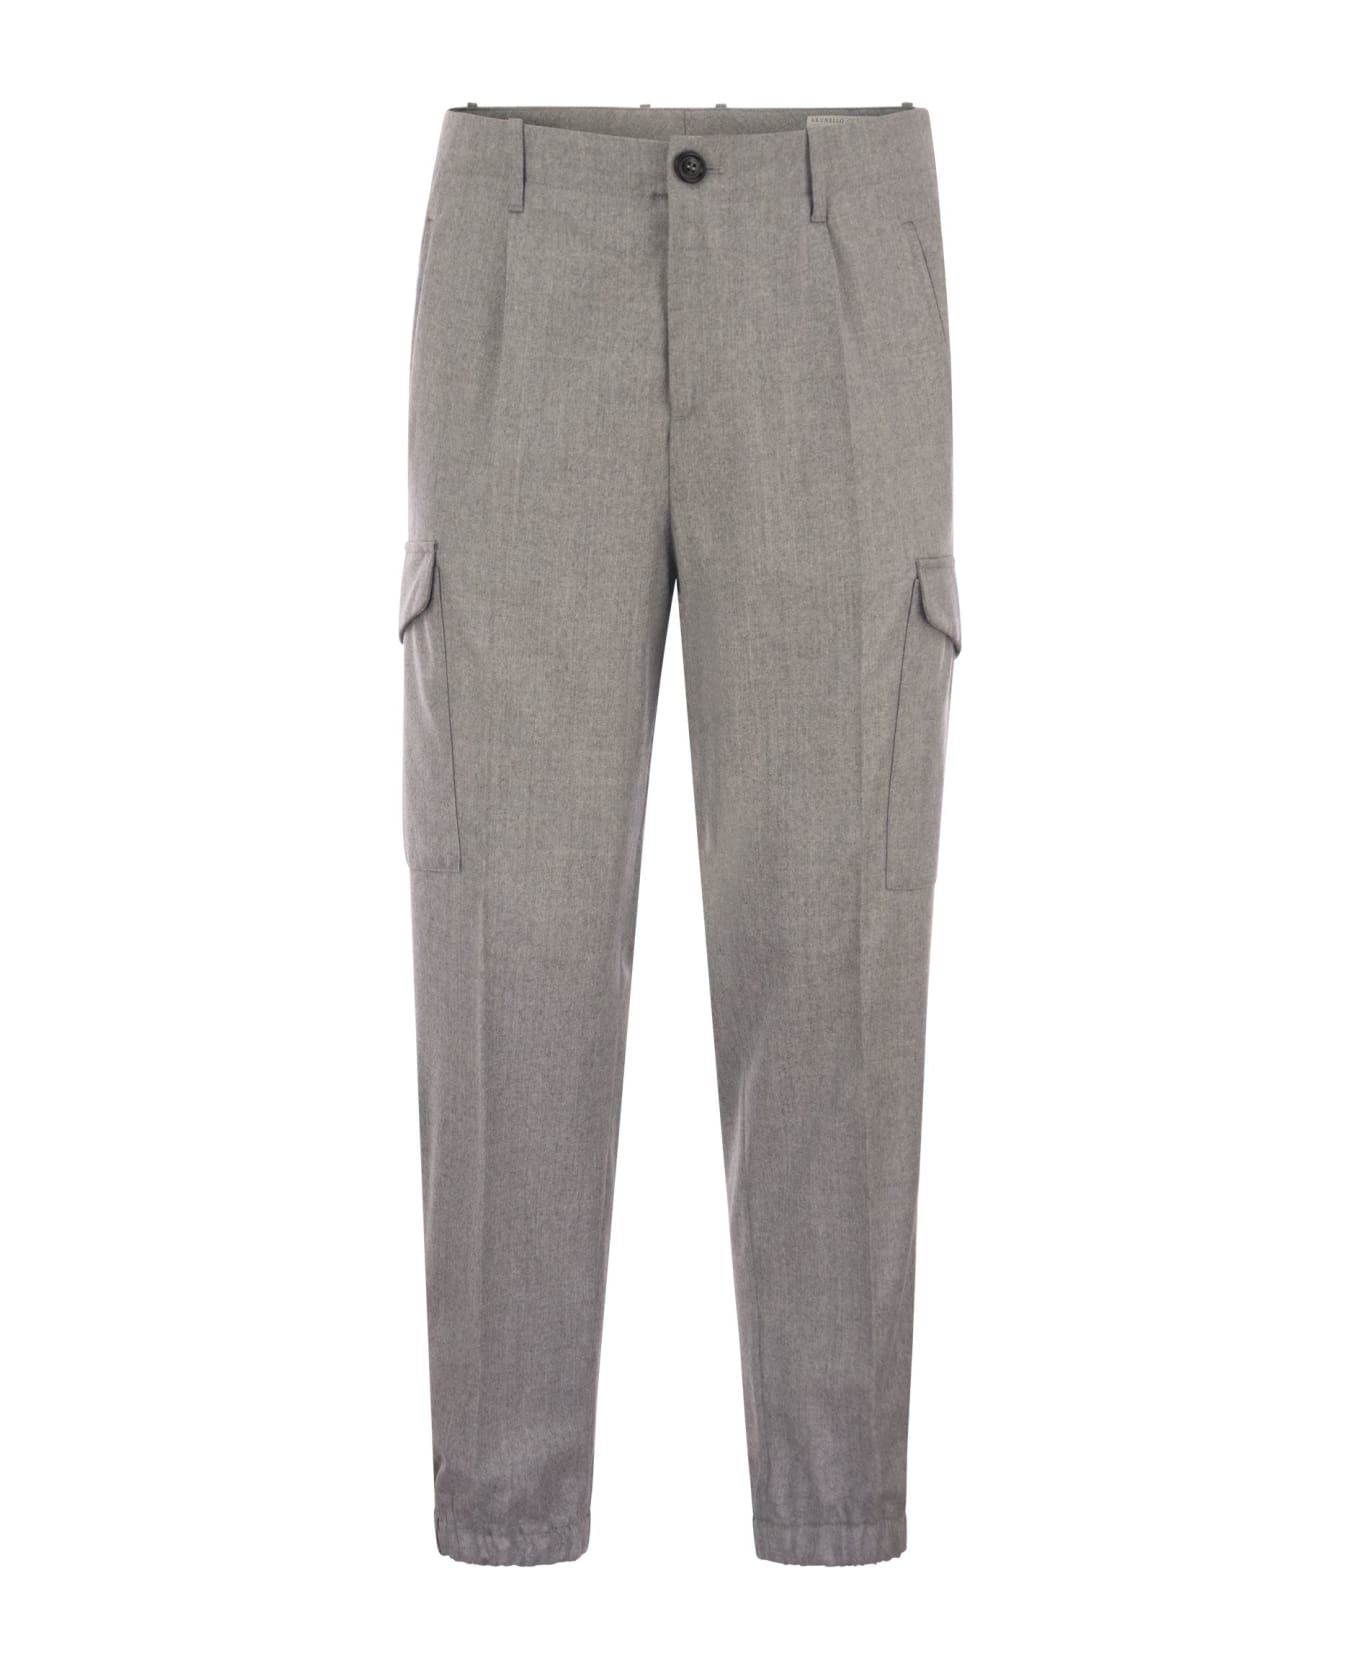 Brunello Cucinelli Wool Trousers With Cargo Pockets And Zipped Bottoms - GRIGIO PERLA ボトムス